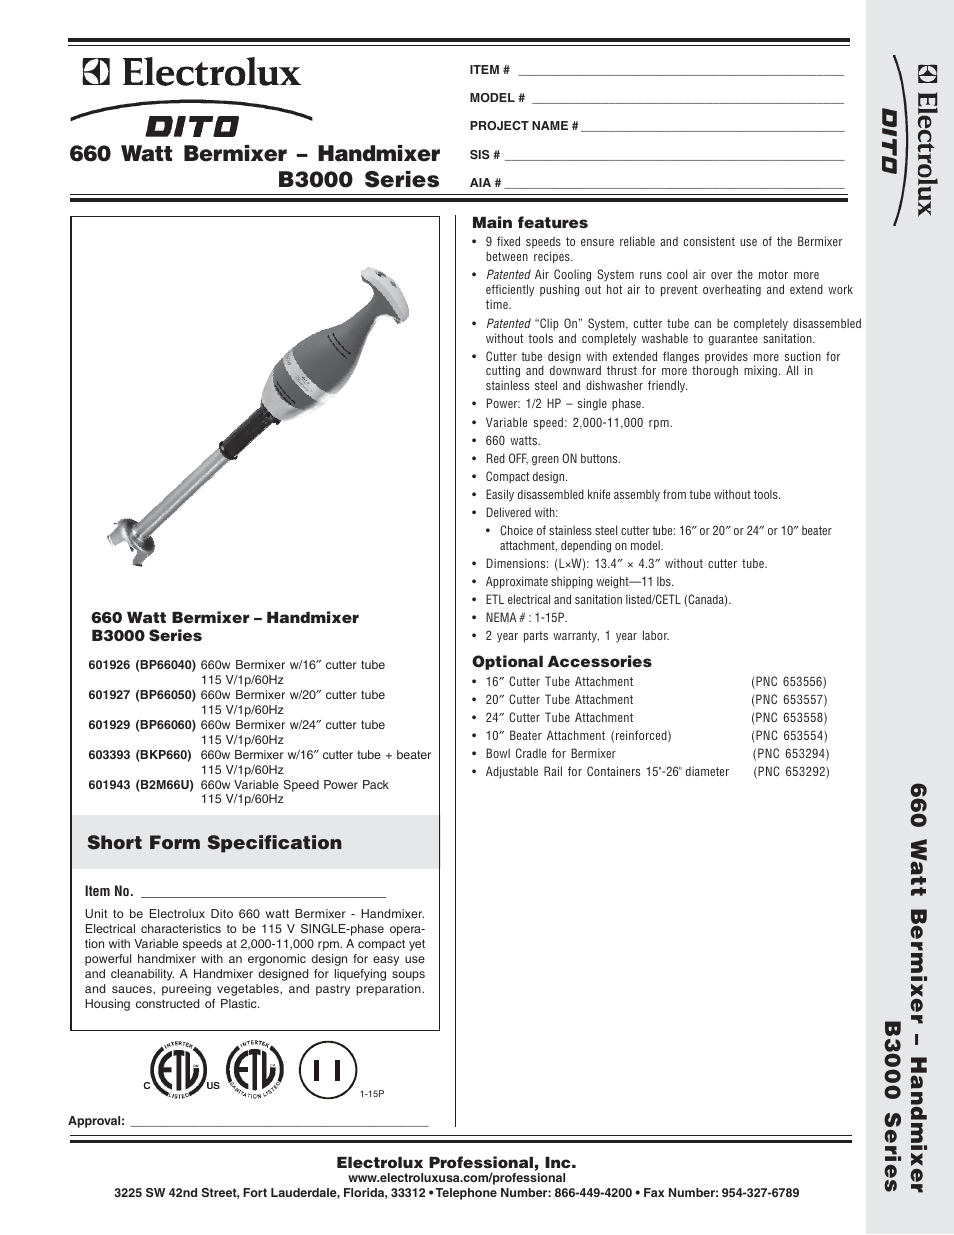 Electrolux Dito BP66040 User Manual | 2 pages